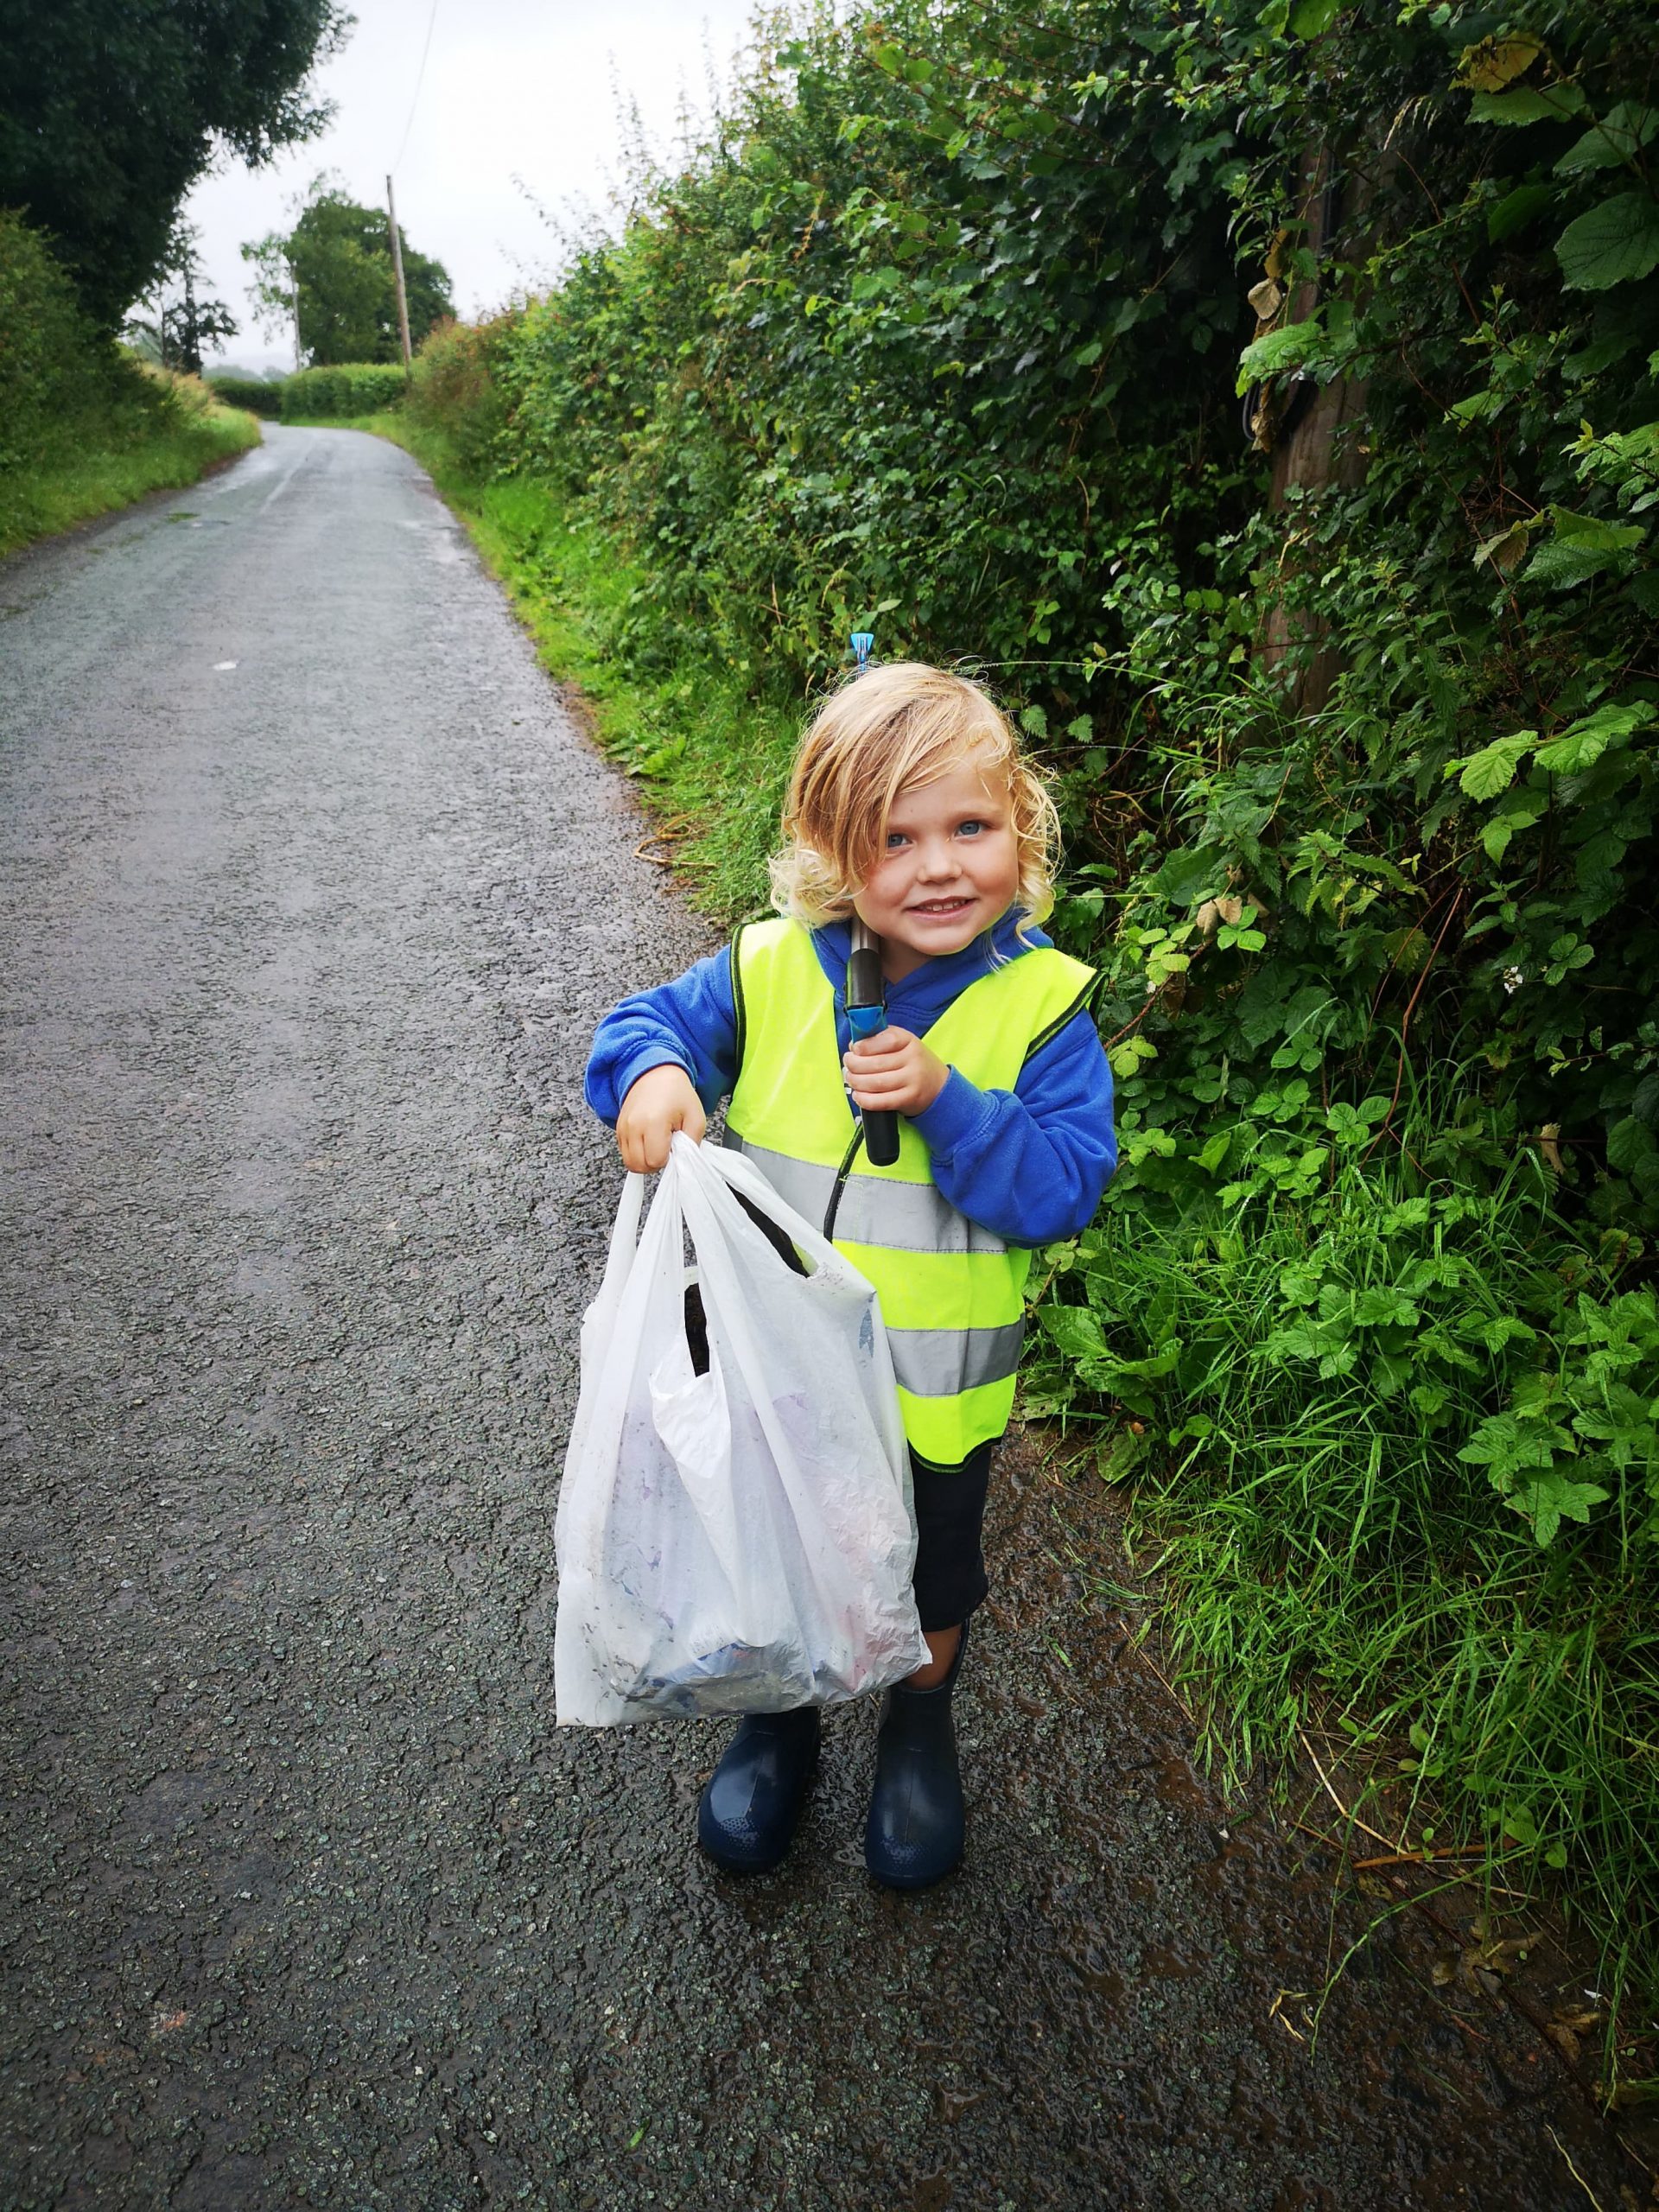 COMMUNITY | Milo has been busy picking litter in Stoke Lacy